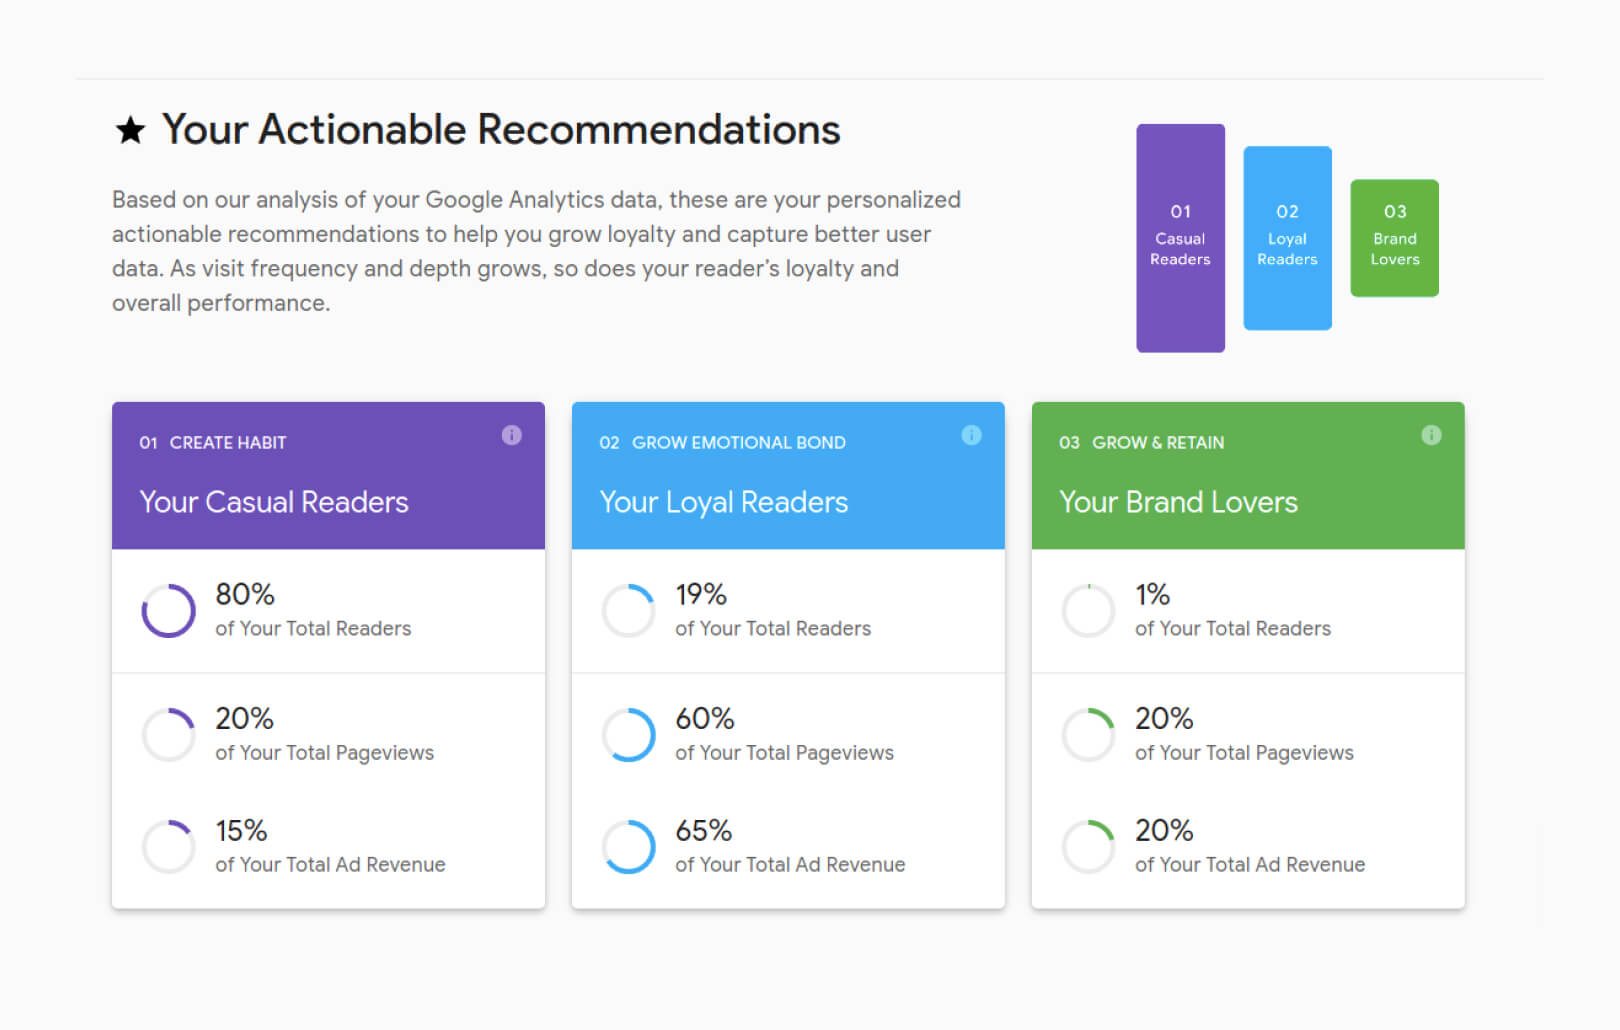 Your Actionable Recommendations